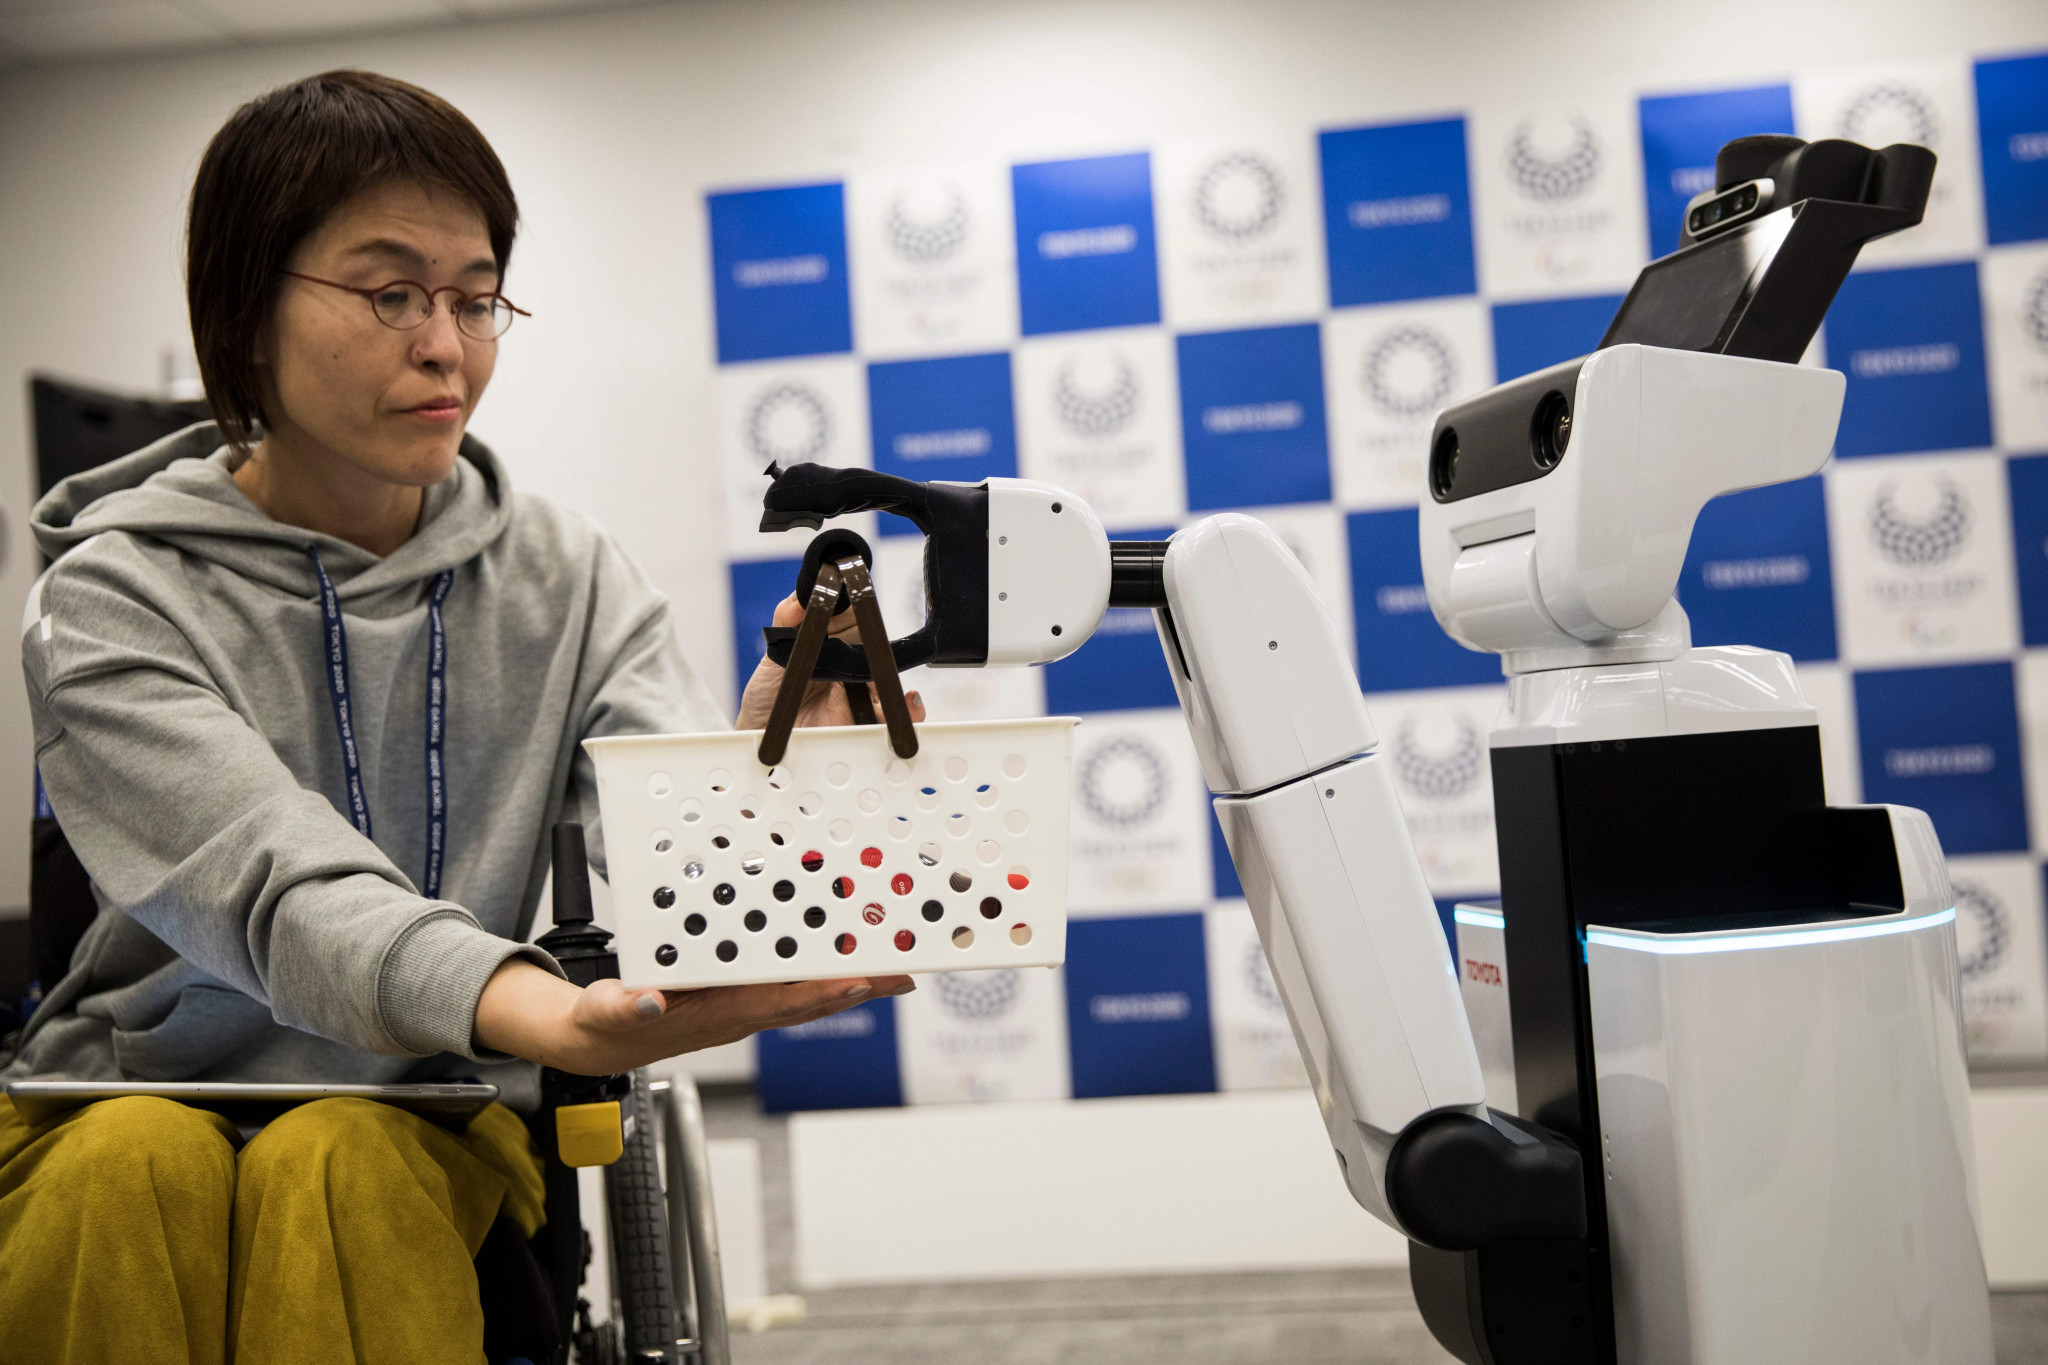 Tokyo 2020 technology to be a "catalyst" for social change